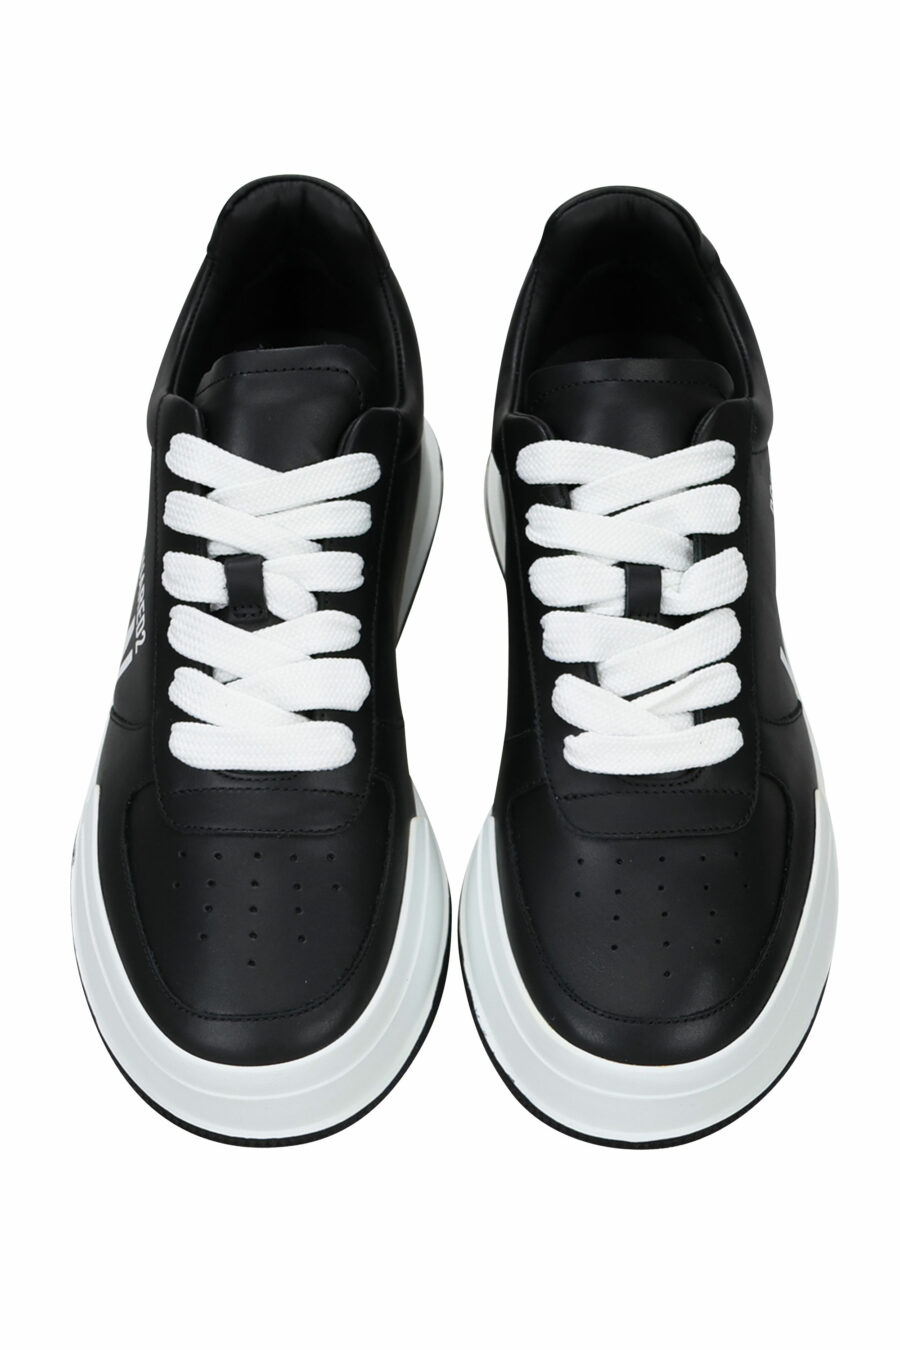 Black trainers with "icon" logo and white sole - 8055777248911 4